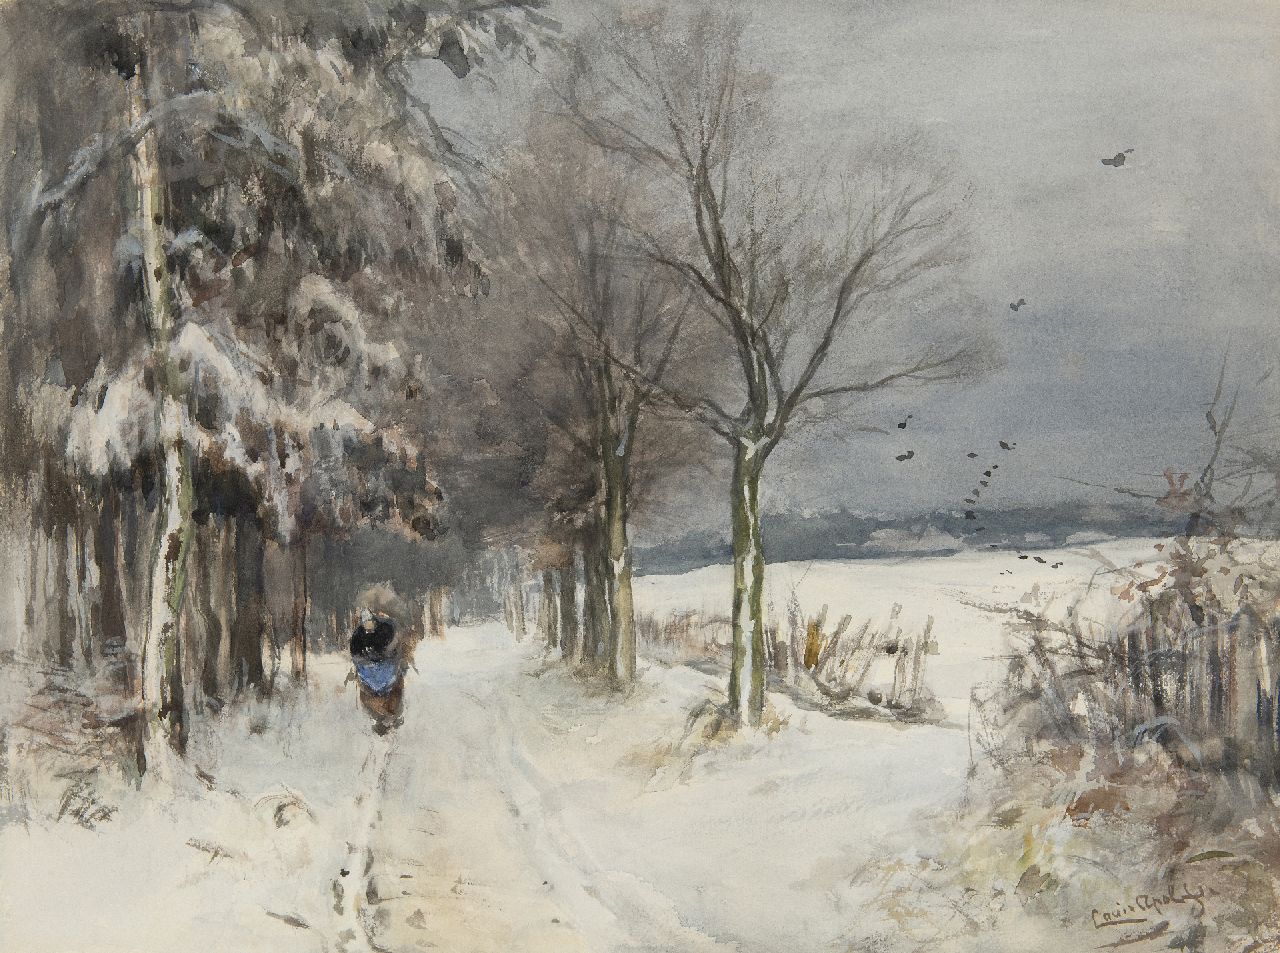 Apol L.F.H.  | Lodewijk Franciscus Hendrik 'Louis' Apol | Watercolours and drawings offered for sale | A snowy landscape with a wood gatherer, watercolour and gouache on paper 40.1 x 53.1 cm, signed l.r.